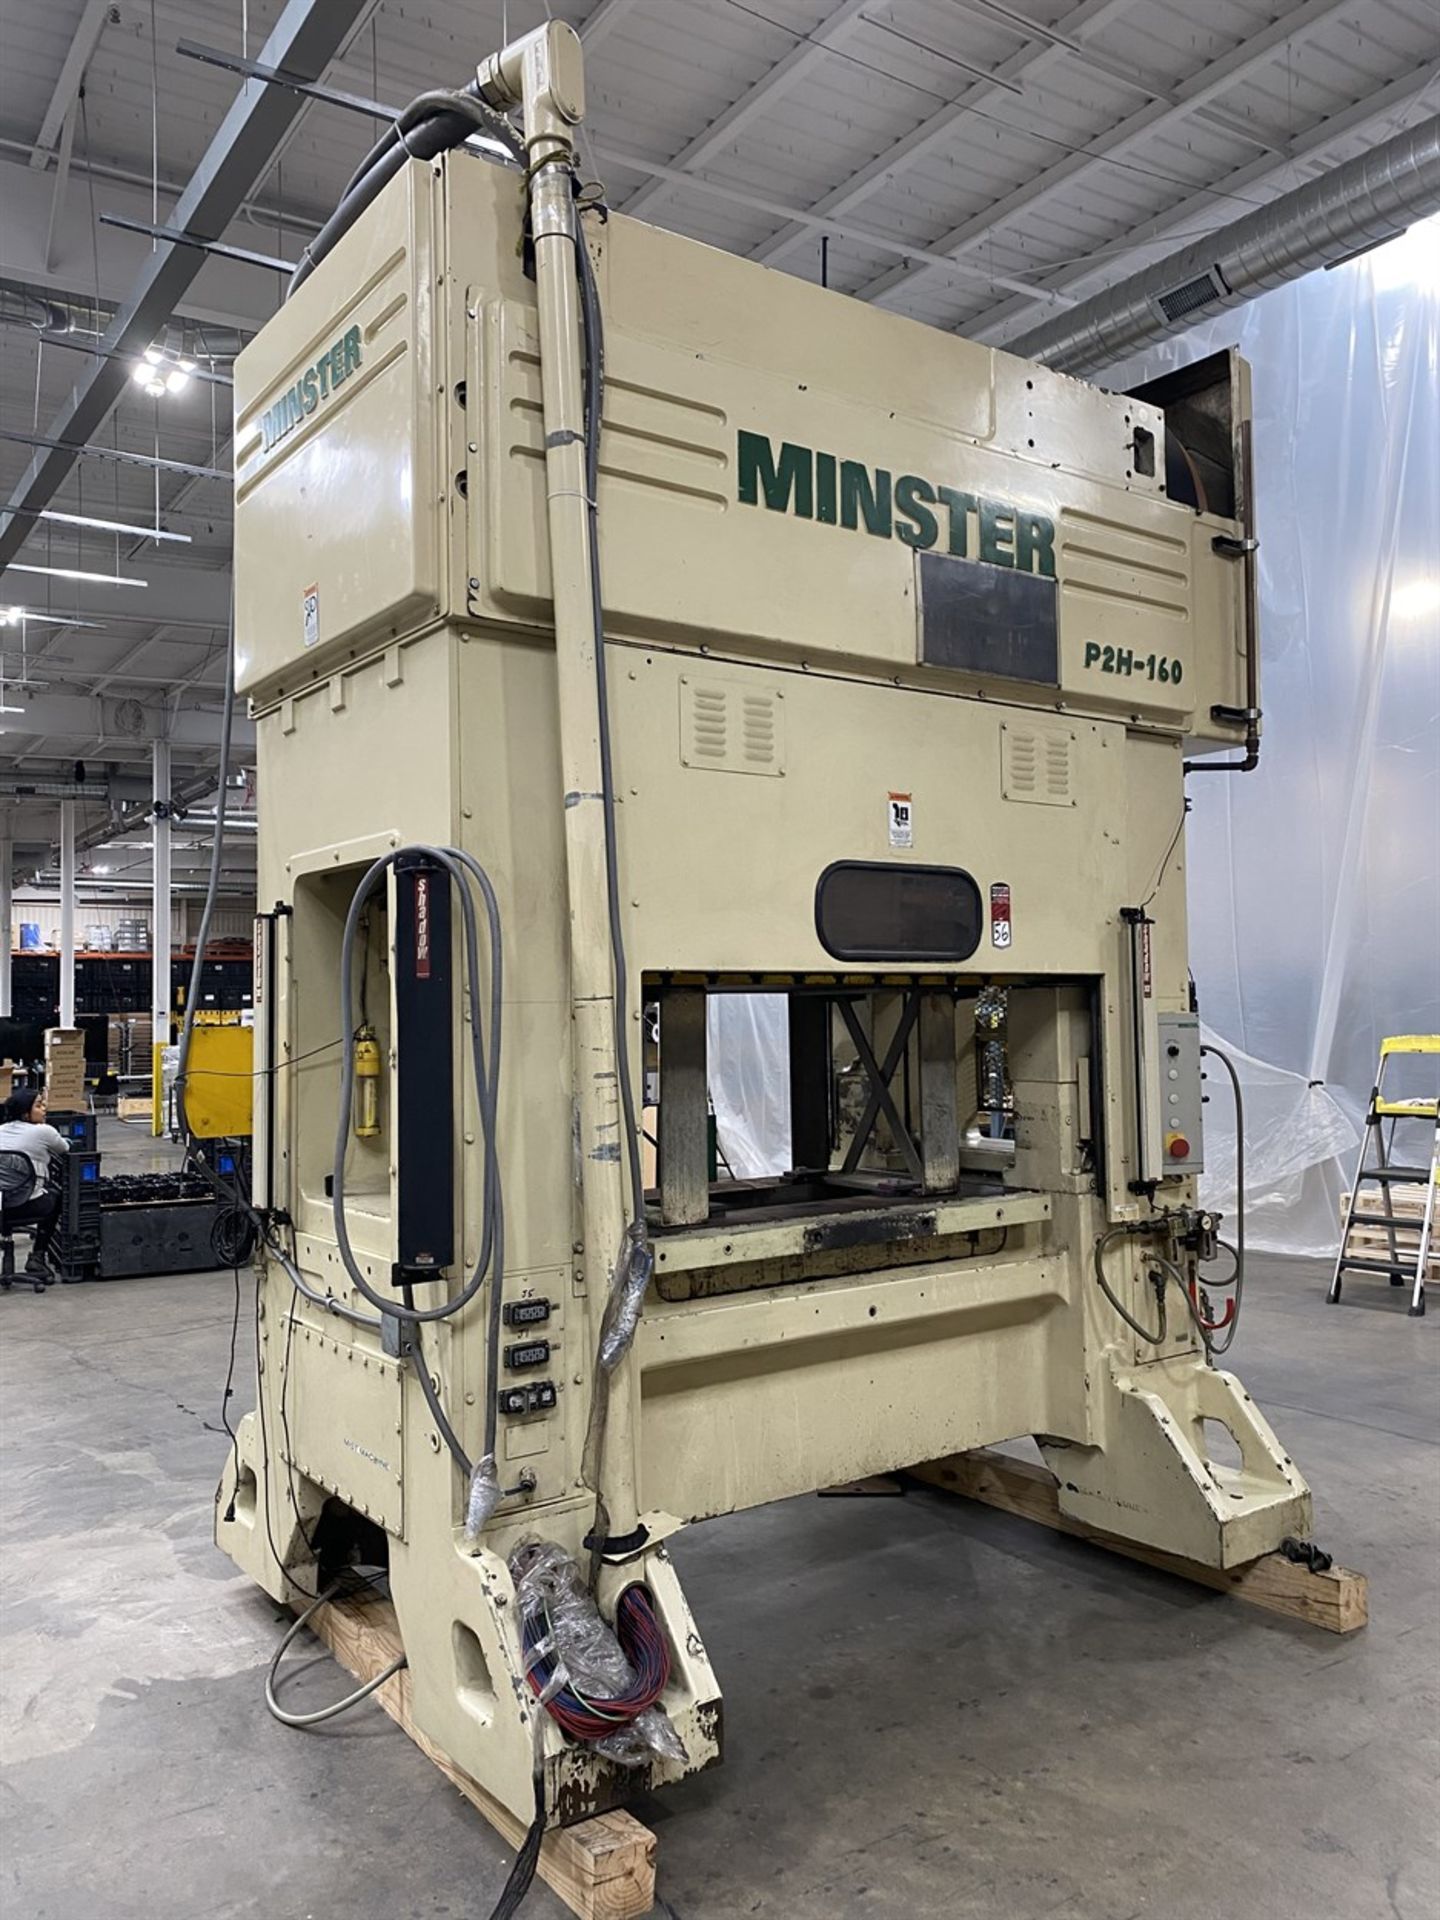 2002 MINSTER P2H-160 Precision Straight Side Press, s/n 30126, 180 Ton Capacity, 63” x 33.5” Bed - Image 2 of 12